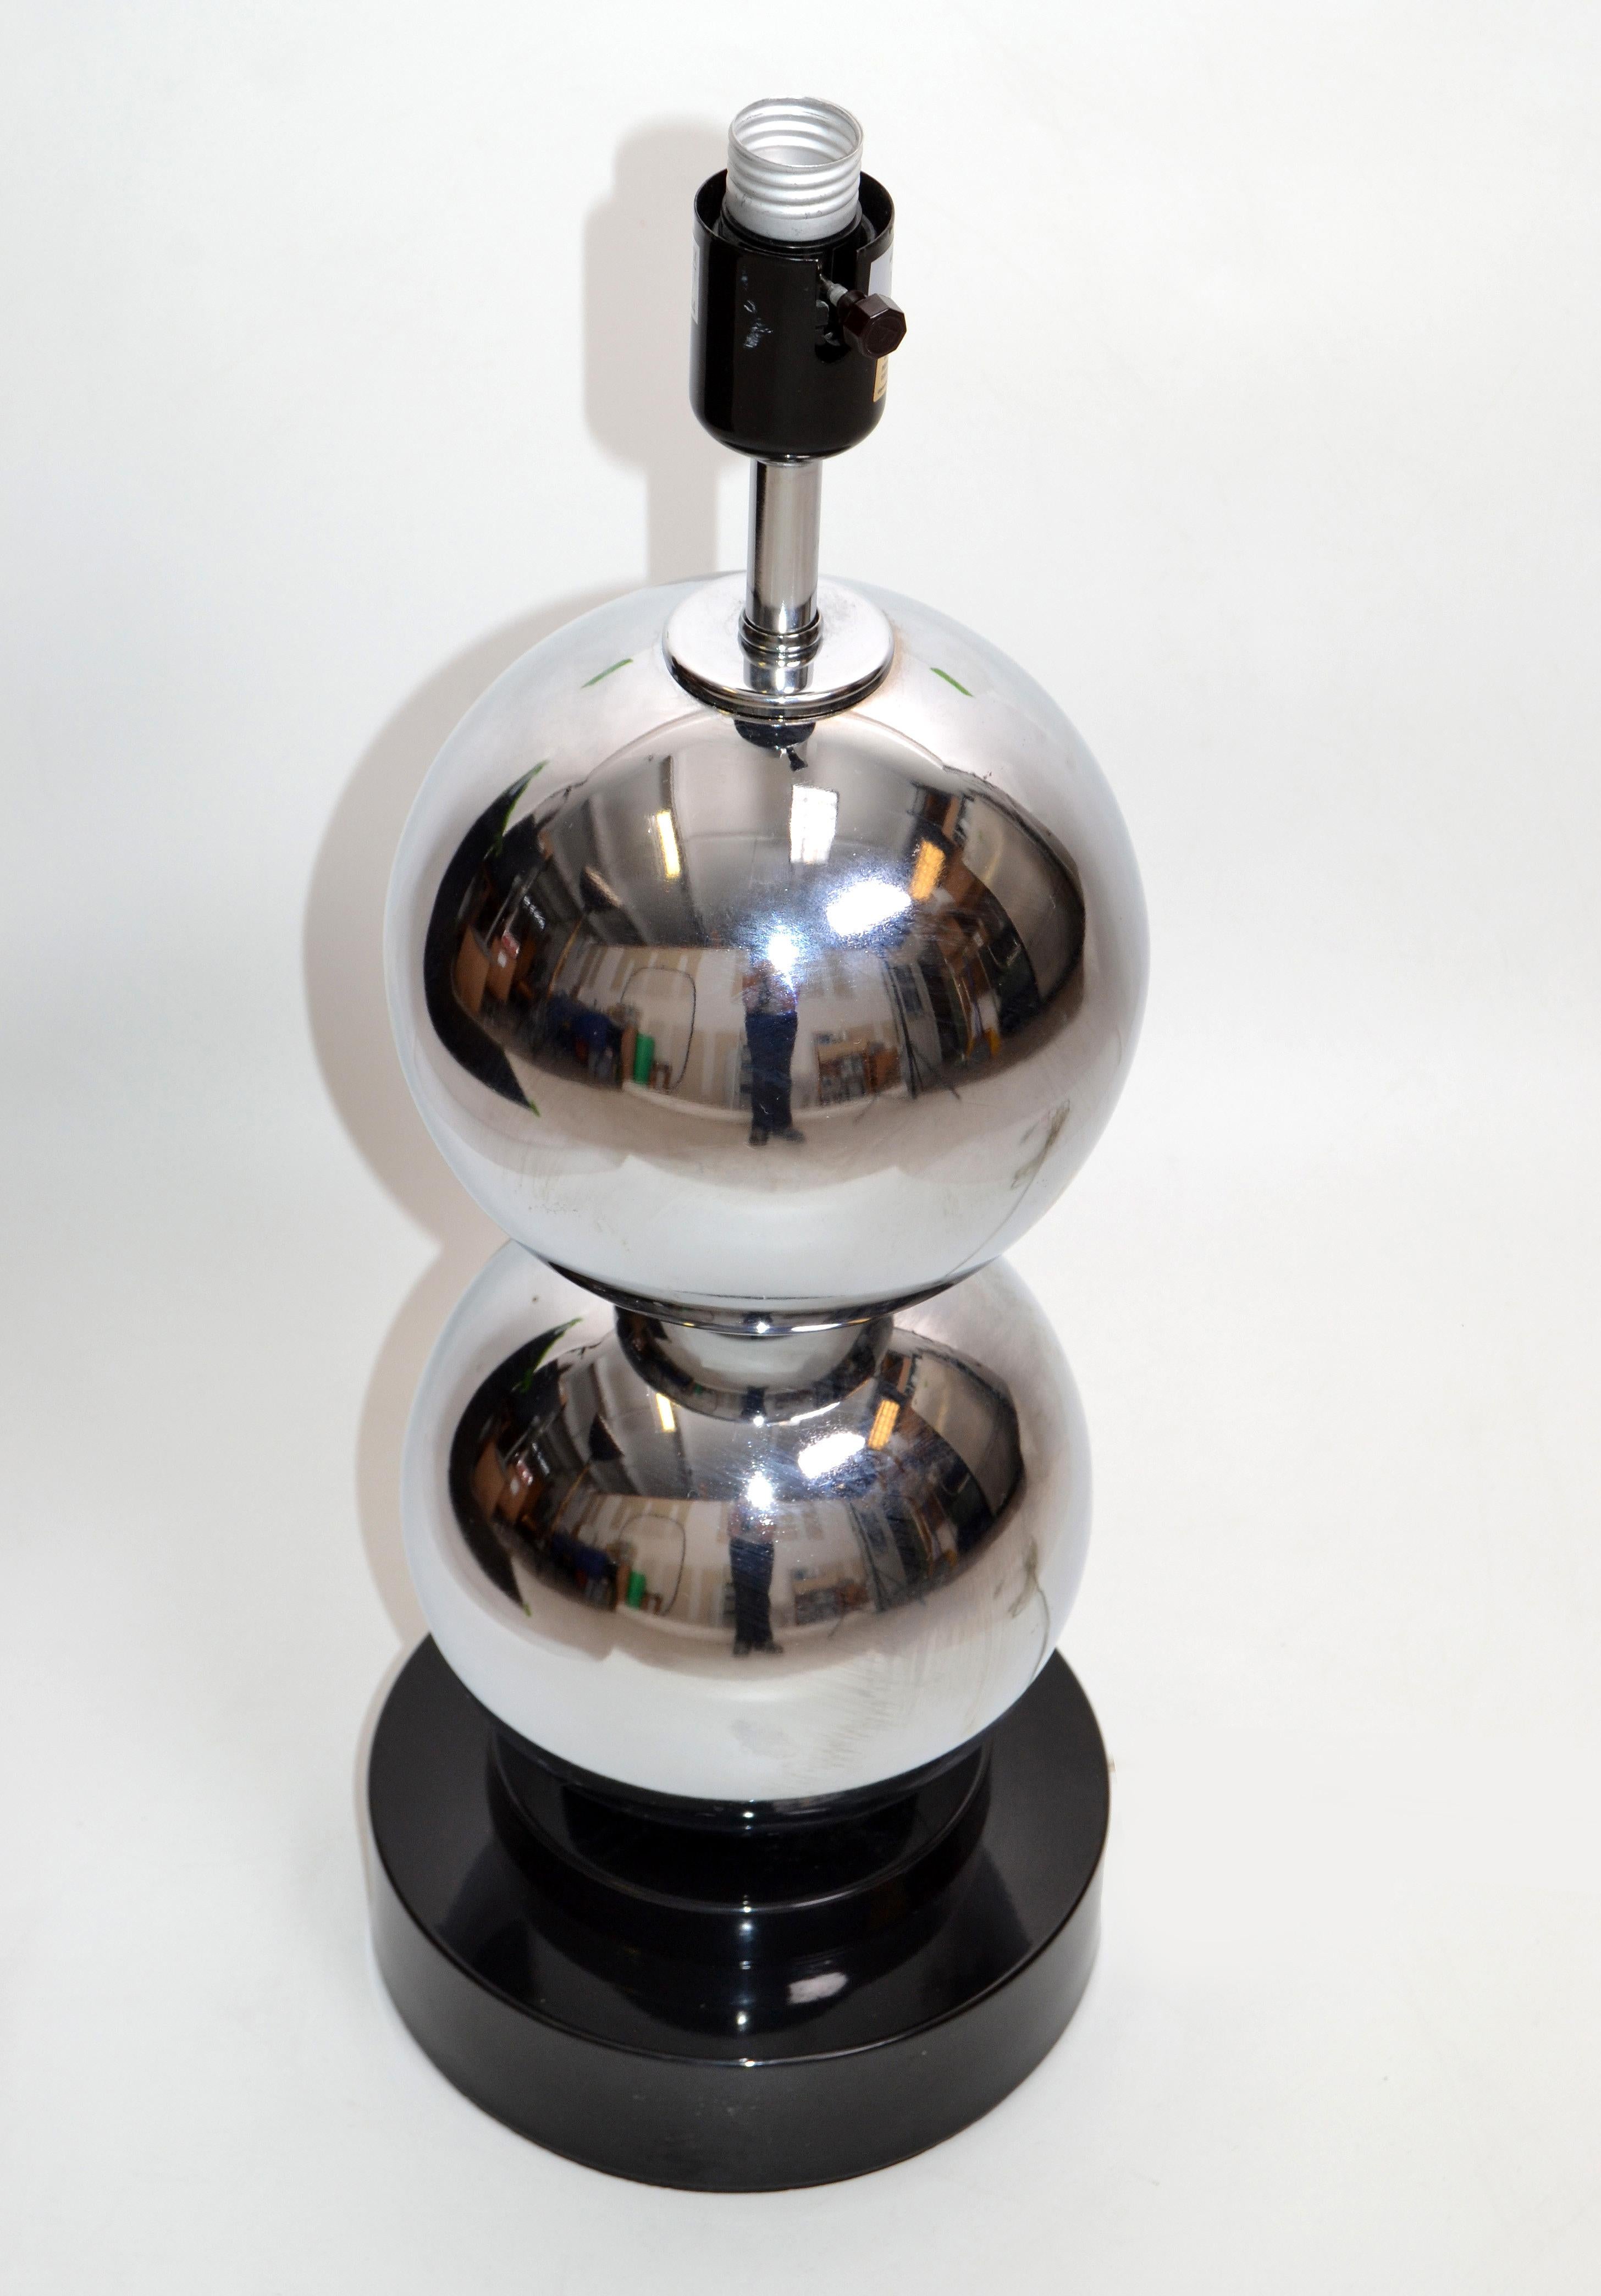 Polished Van Teal Modern Chrome Ball Silver Finish Table Lamp 3-Way Switch Contemporary